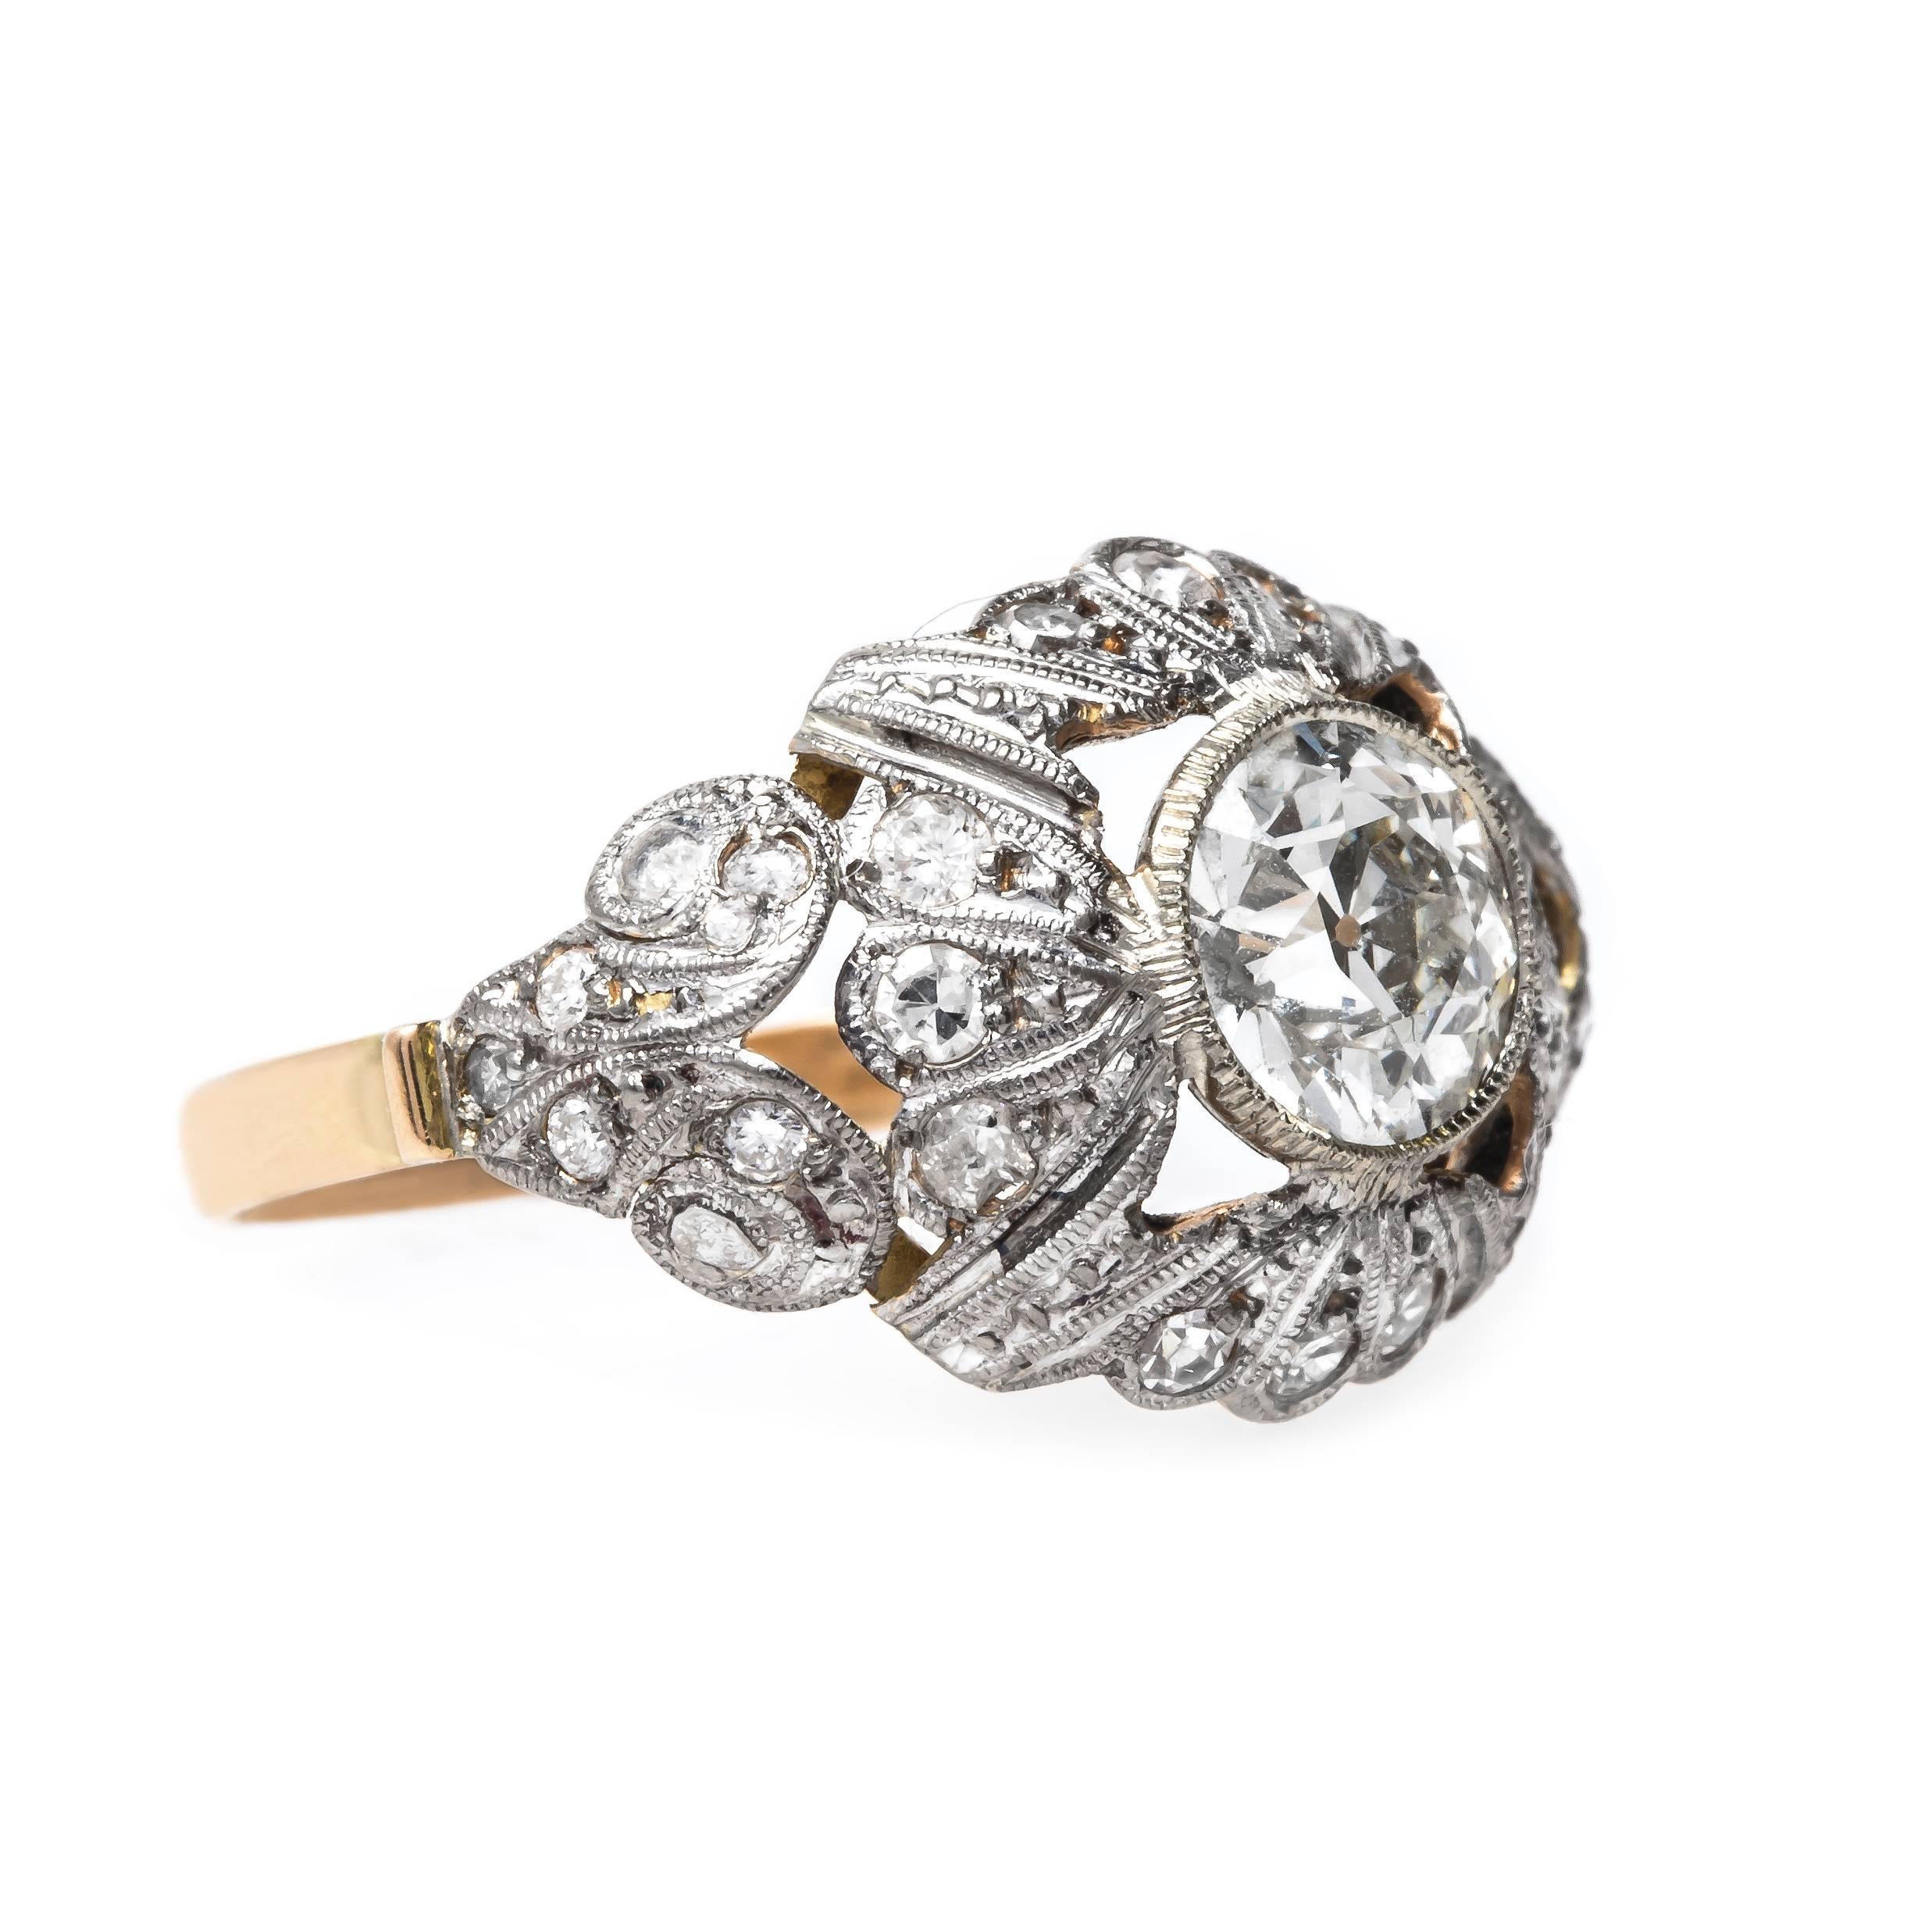 Gatewood is a fabulous one-of-a-kind, authentic Art Nouveau (circa 1910) platinum and 18k yellow gold ring accompanied with extremely coveted European Hallmarks on the outside shank. The ring centers a bezel set 1.08ct EGL certified Old European Cut